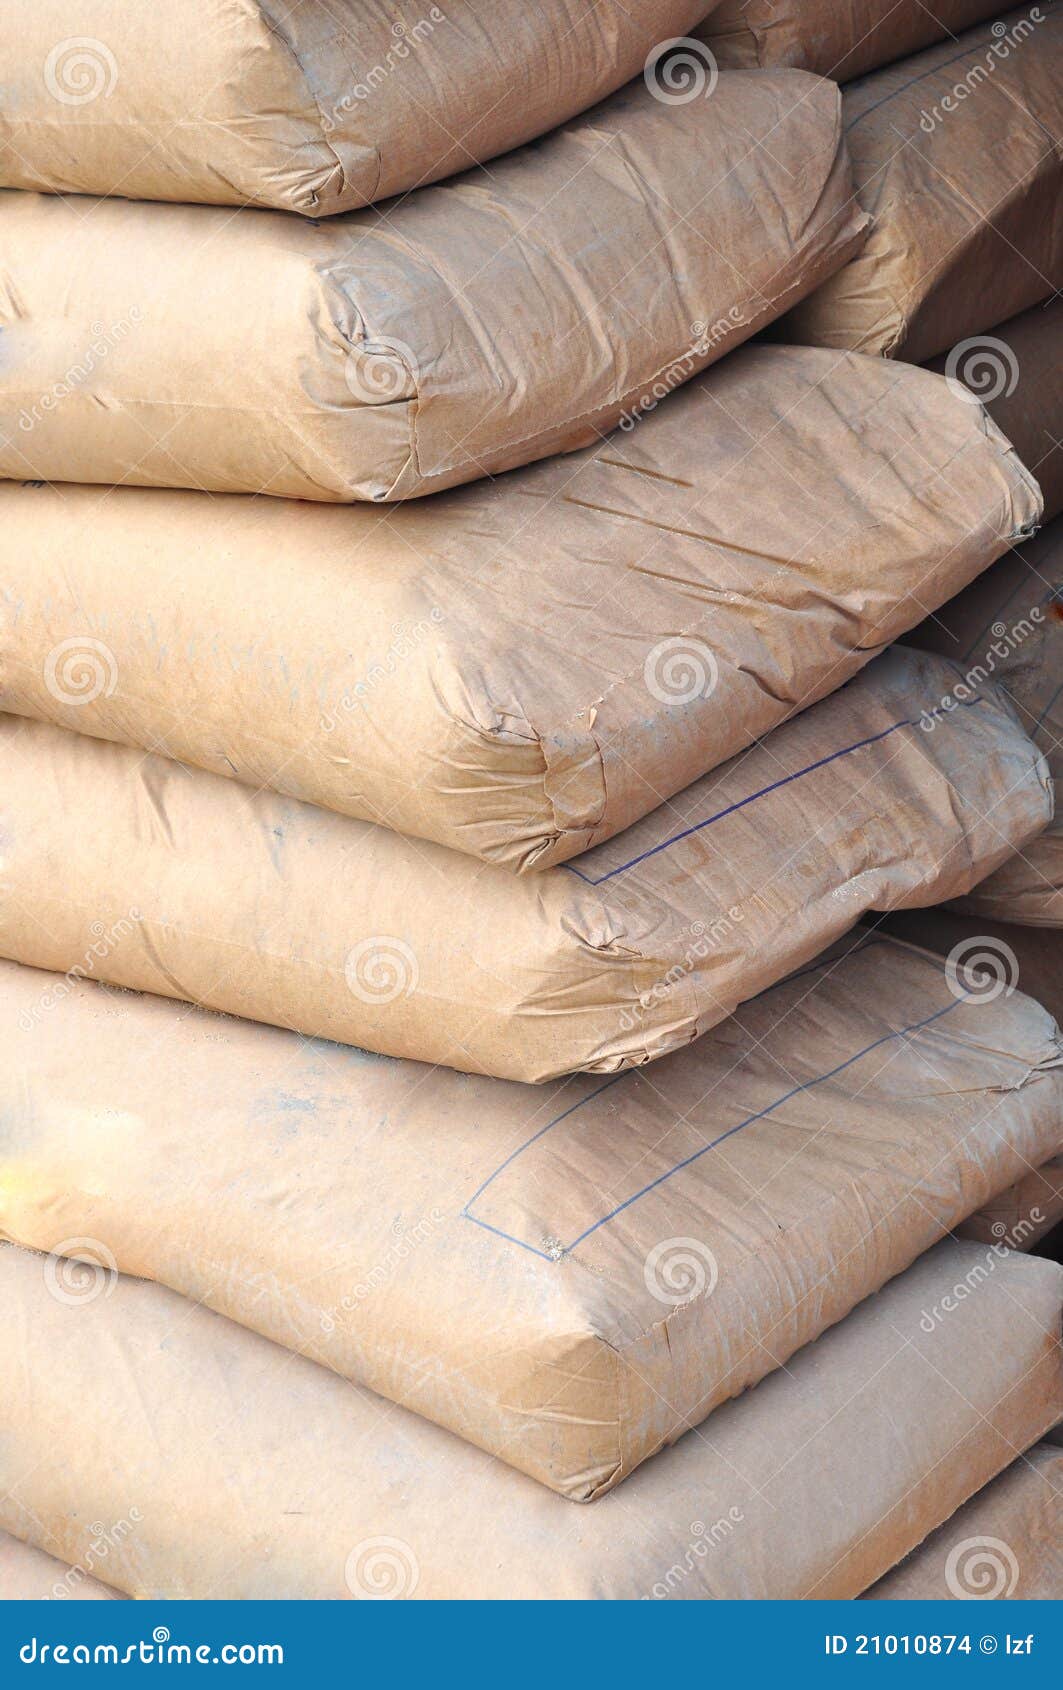 Cement bags stock photo. Image of closeup, jetereting - 21010874